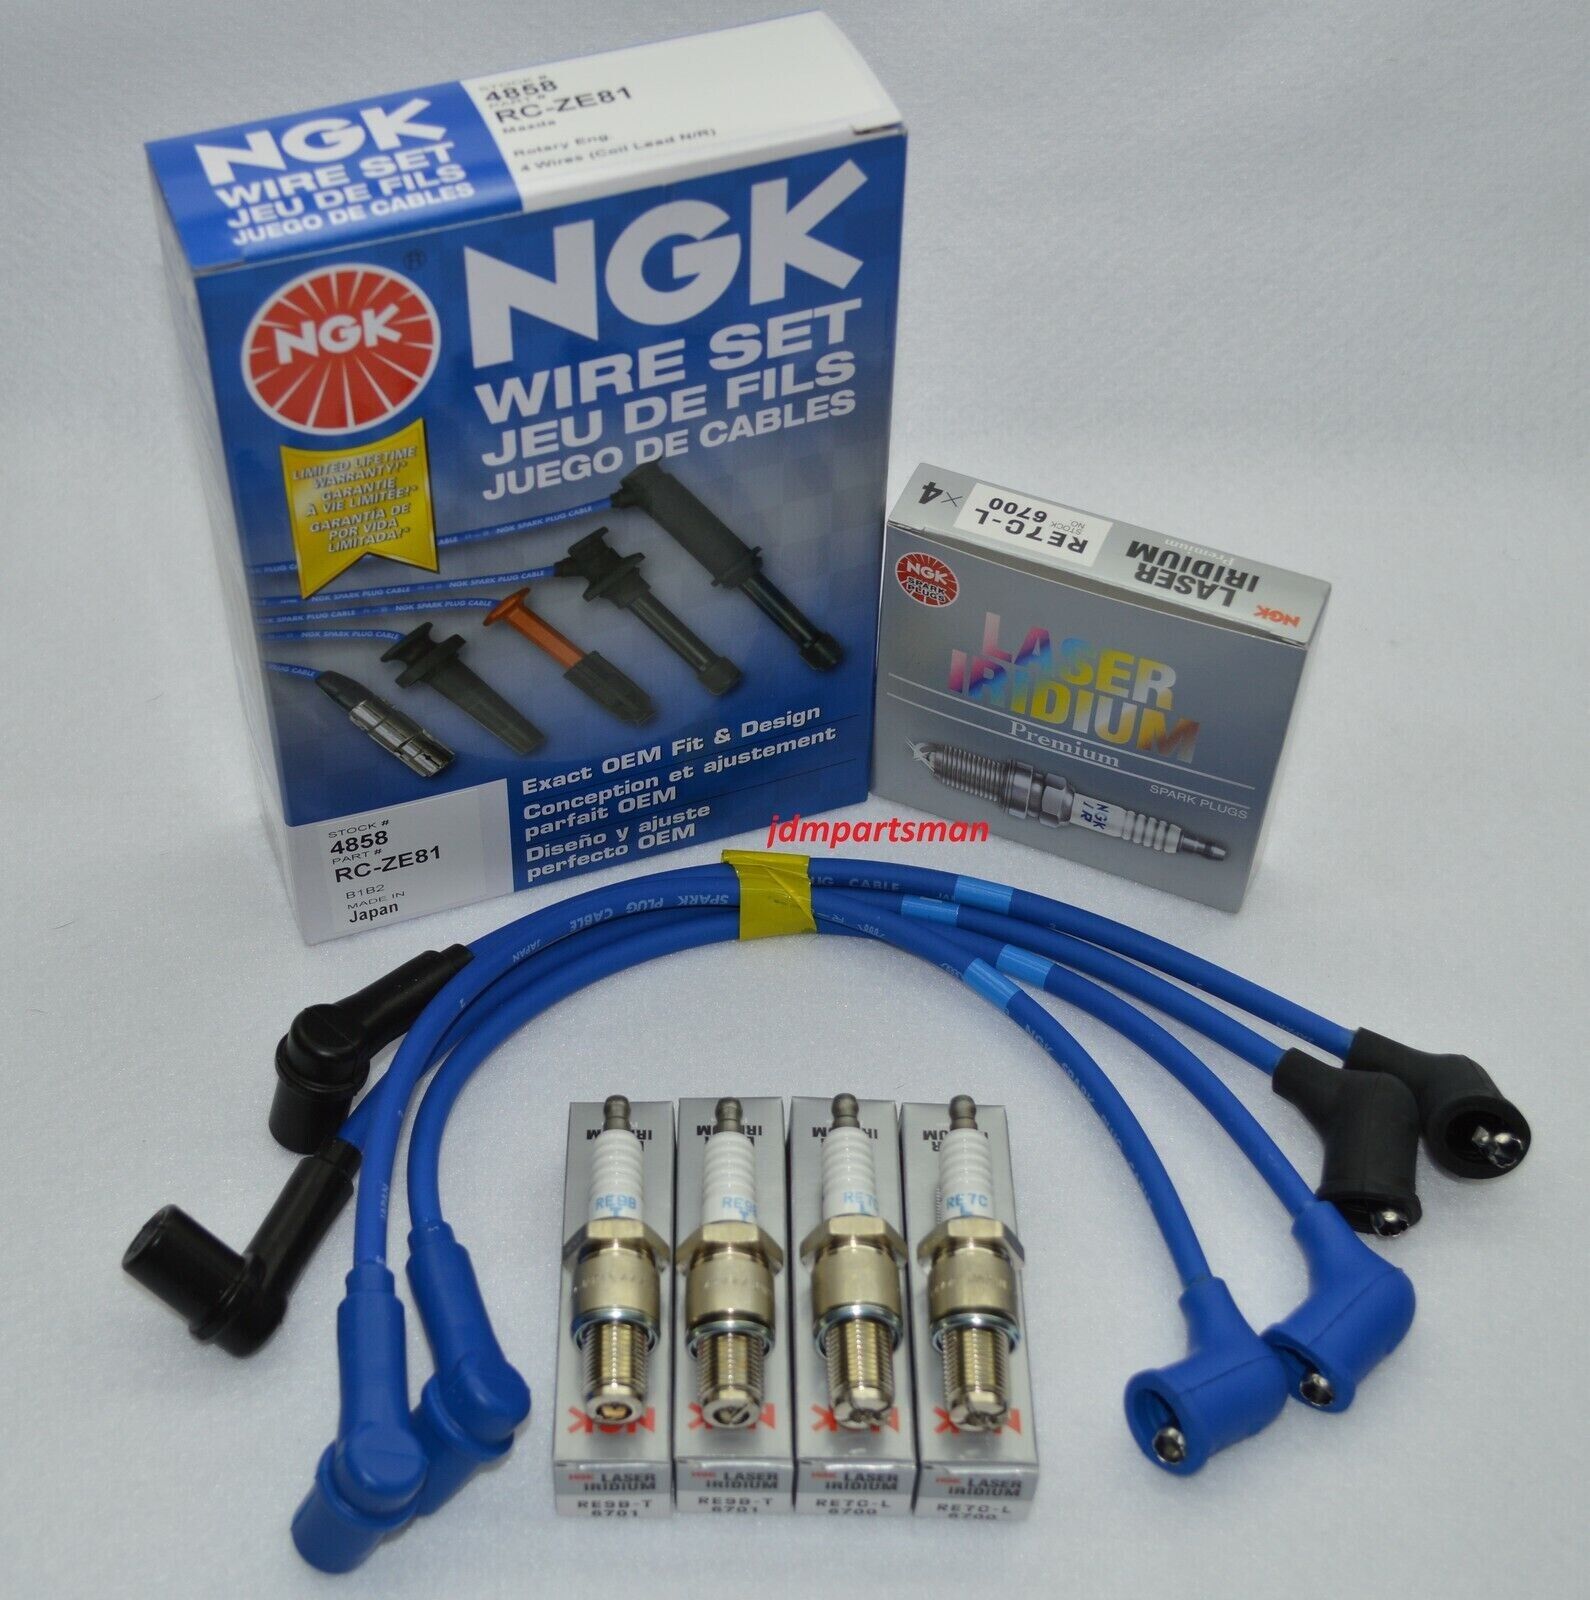 FOR MAZDA RX-8 NGK EXACT FIT IGNITION WIRE SET+4 NGK IRIDIUM SPARK PLUGS RENESIS